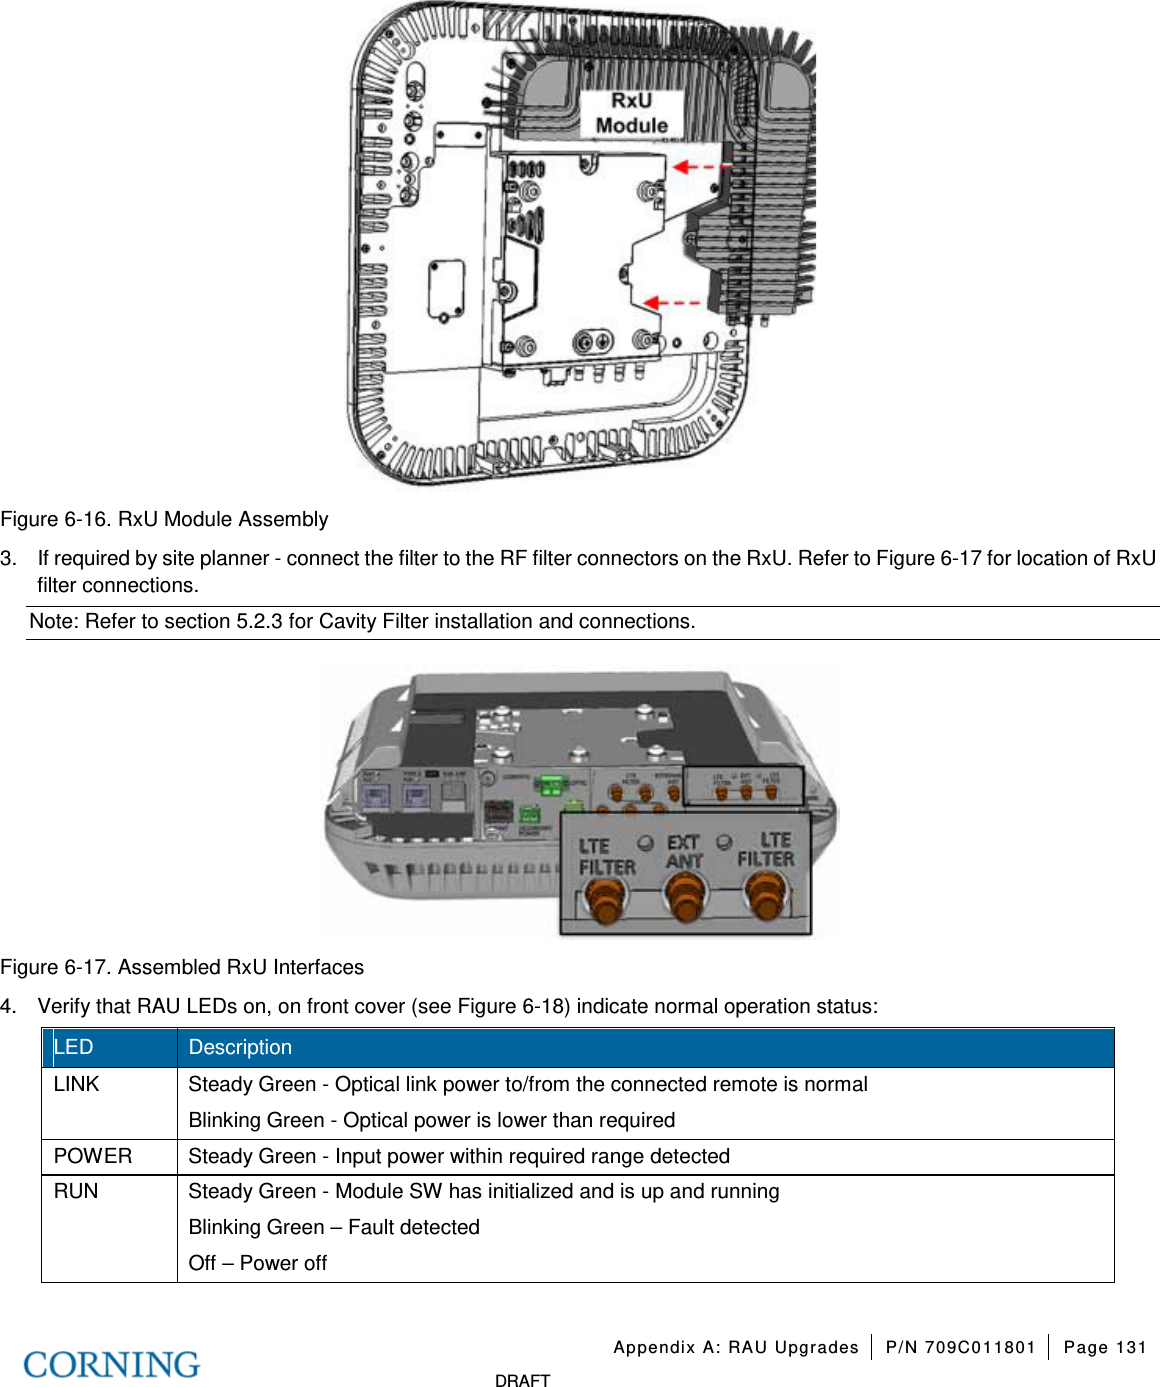   Appendix A: RAU Upgrades P/N 709C011801 Page 131   DRAFT  Figure  6-16. RxU Module Assembly 3.  If required by site planner - connect the filter to the RF filter connectors on the RxU. Refer to Figure  6-17 for location of RxU filter connections.   Note: Refer to section  5.2.3 for Cavity Filter installation and connections.  Figure  6-17. Assembled RxU Interfaces 4.  Verify that RAU LEDs on, on front cover (see Figure  6-18) indicate normal operation status:   LED Description LINK   Steady Green - Optical link power to/from the connected remote is normal   Blinking Green - Optical power is lower than required POWER Steady Green - Input power within required range detected RUN   Steady Green - Module SW has initialized and is up and running Blinking Green – Fault detected Off – Power off  